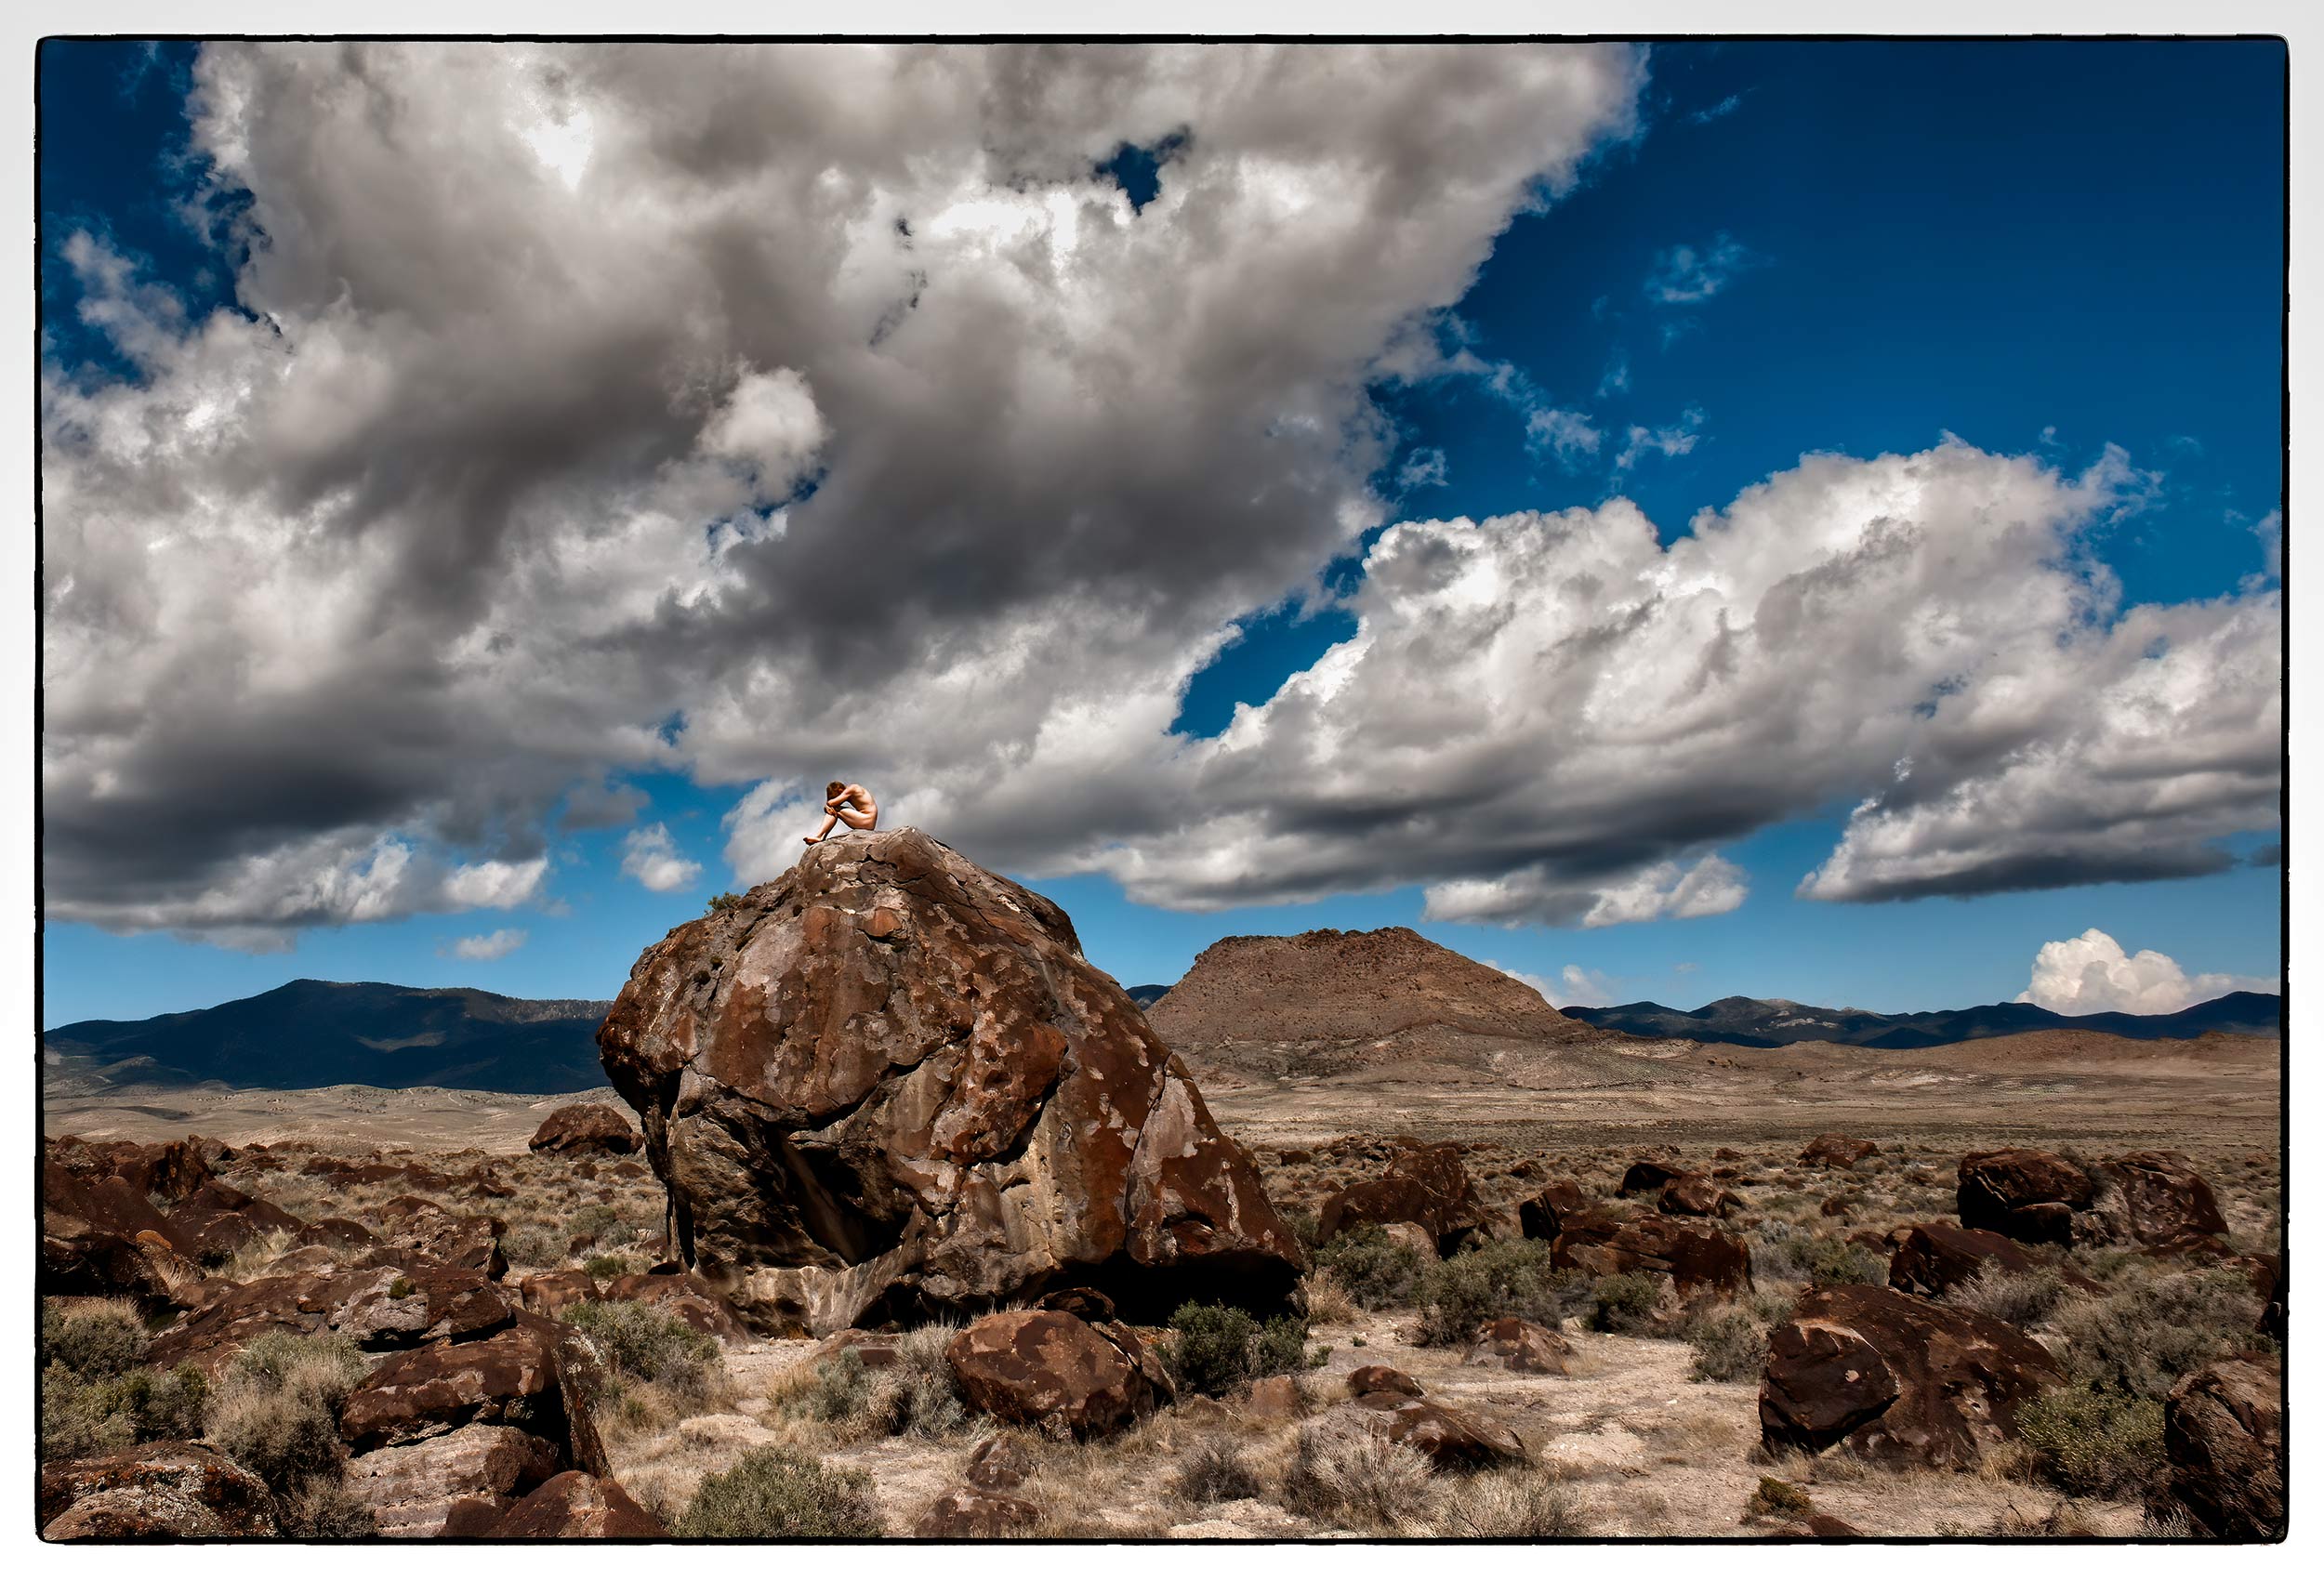 a-young-man-sits-naked-on-top-of-a-giant-boulder-in-the-nevada-desert-surrounded-by-blue-skies-and-clouds